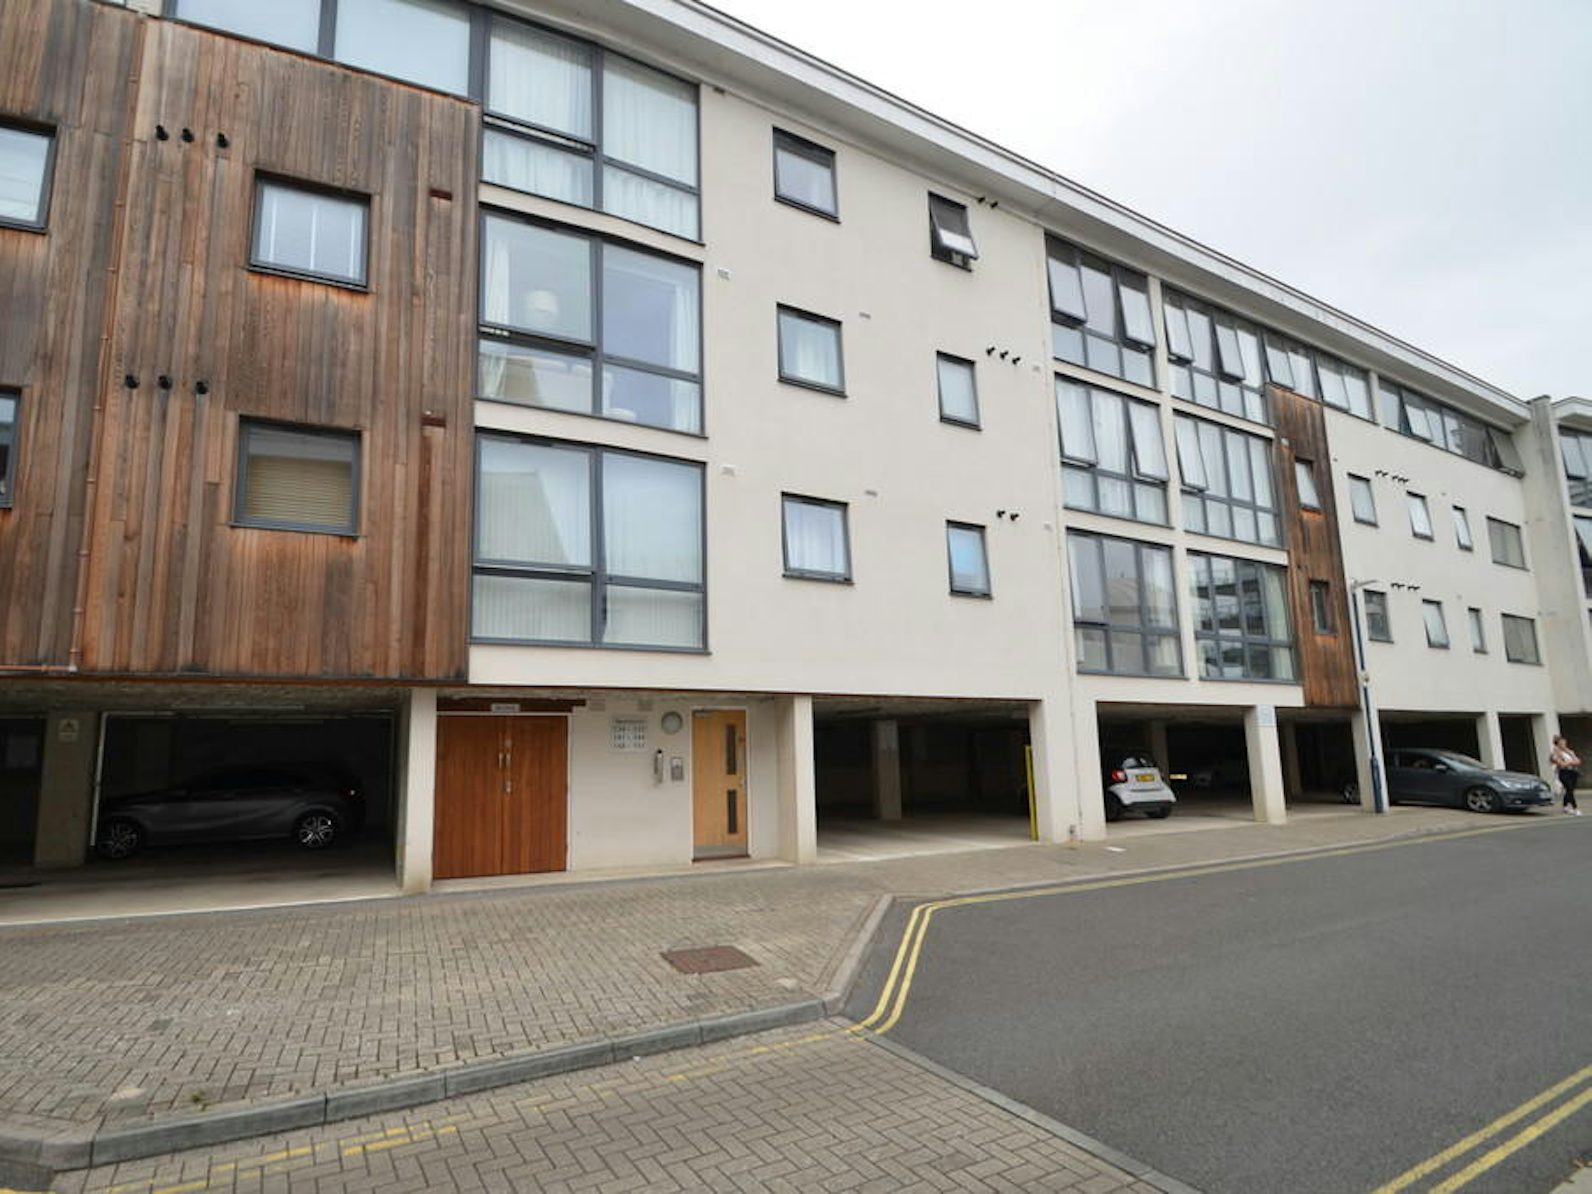 Flat to rent on Maidstone, ME16